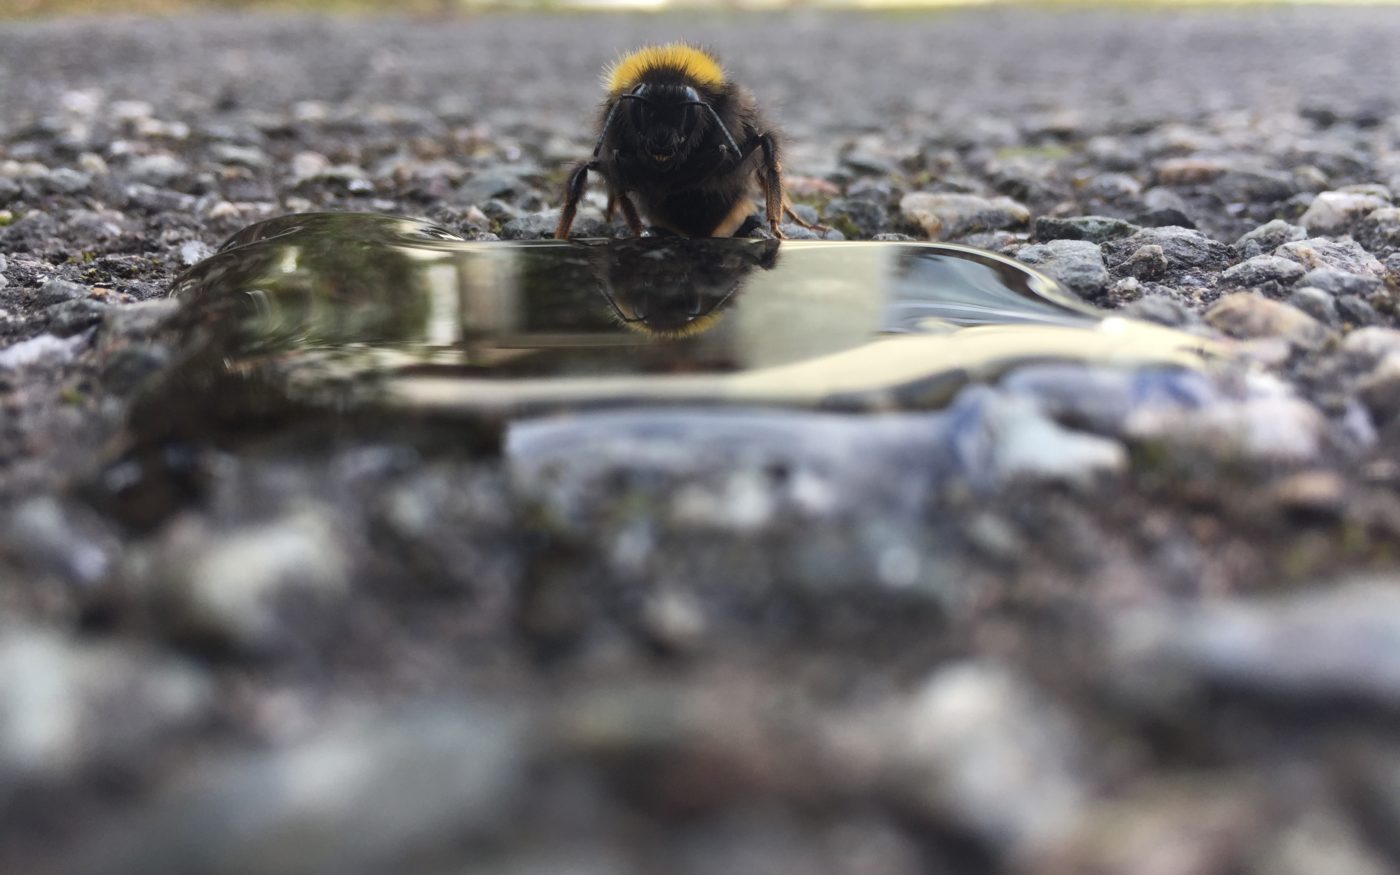 Low level view of a bee on a piece of metal or glass